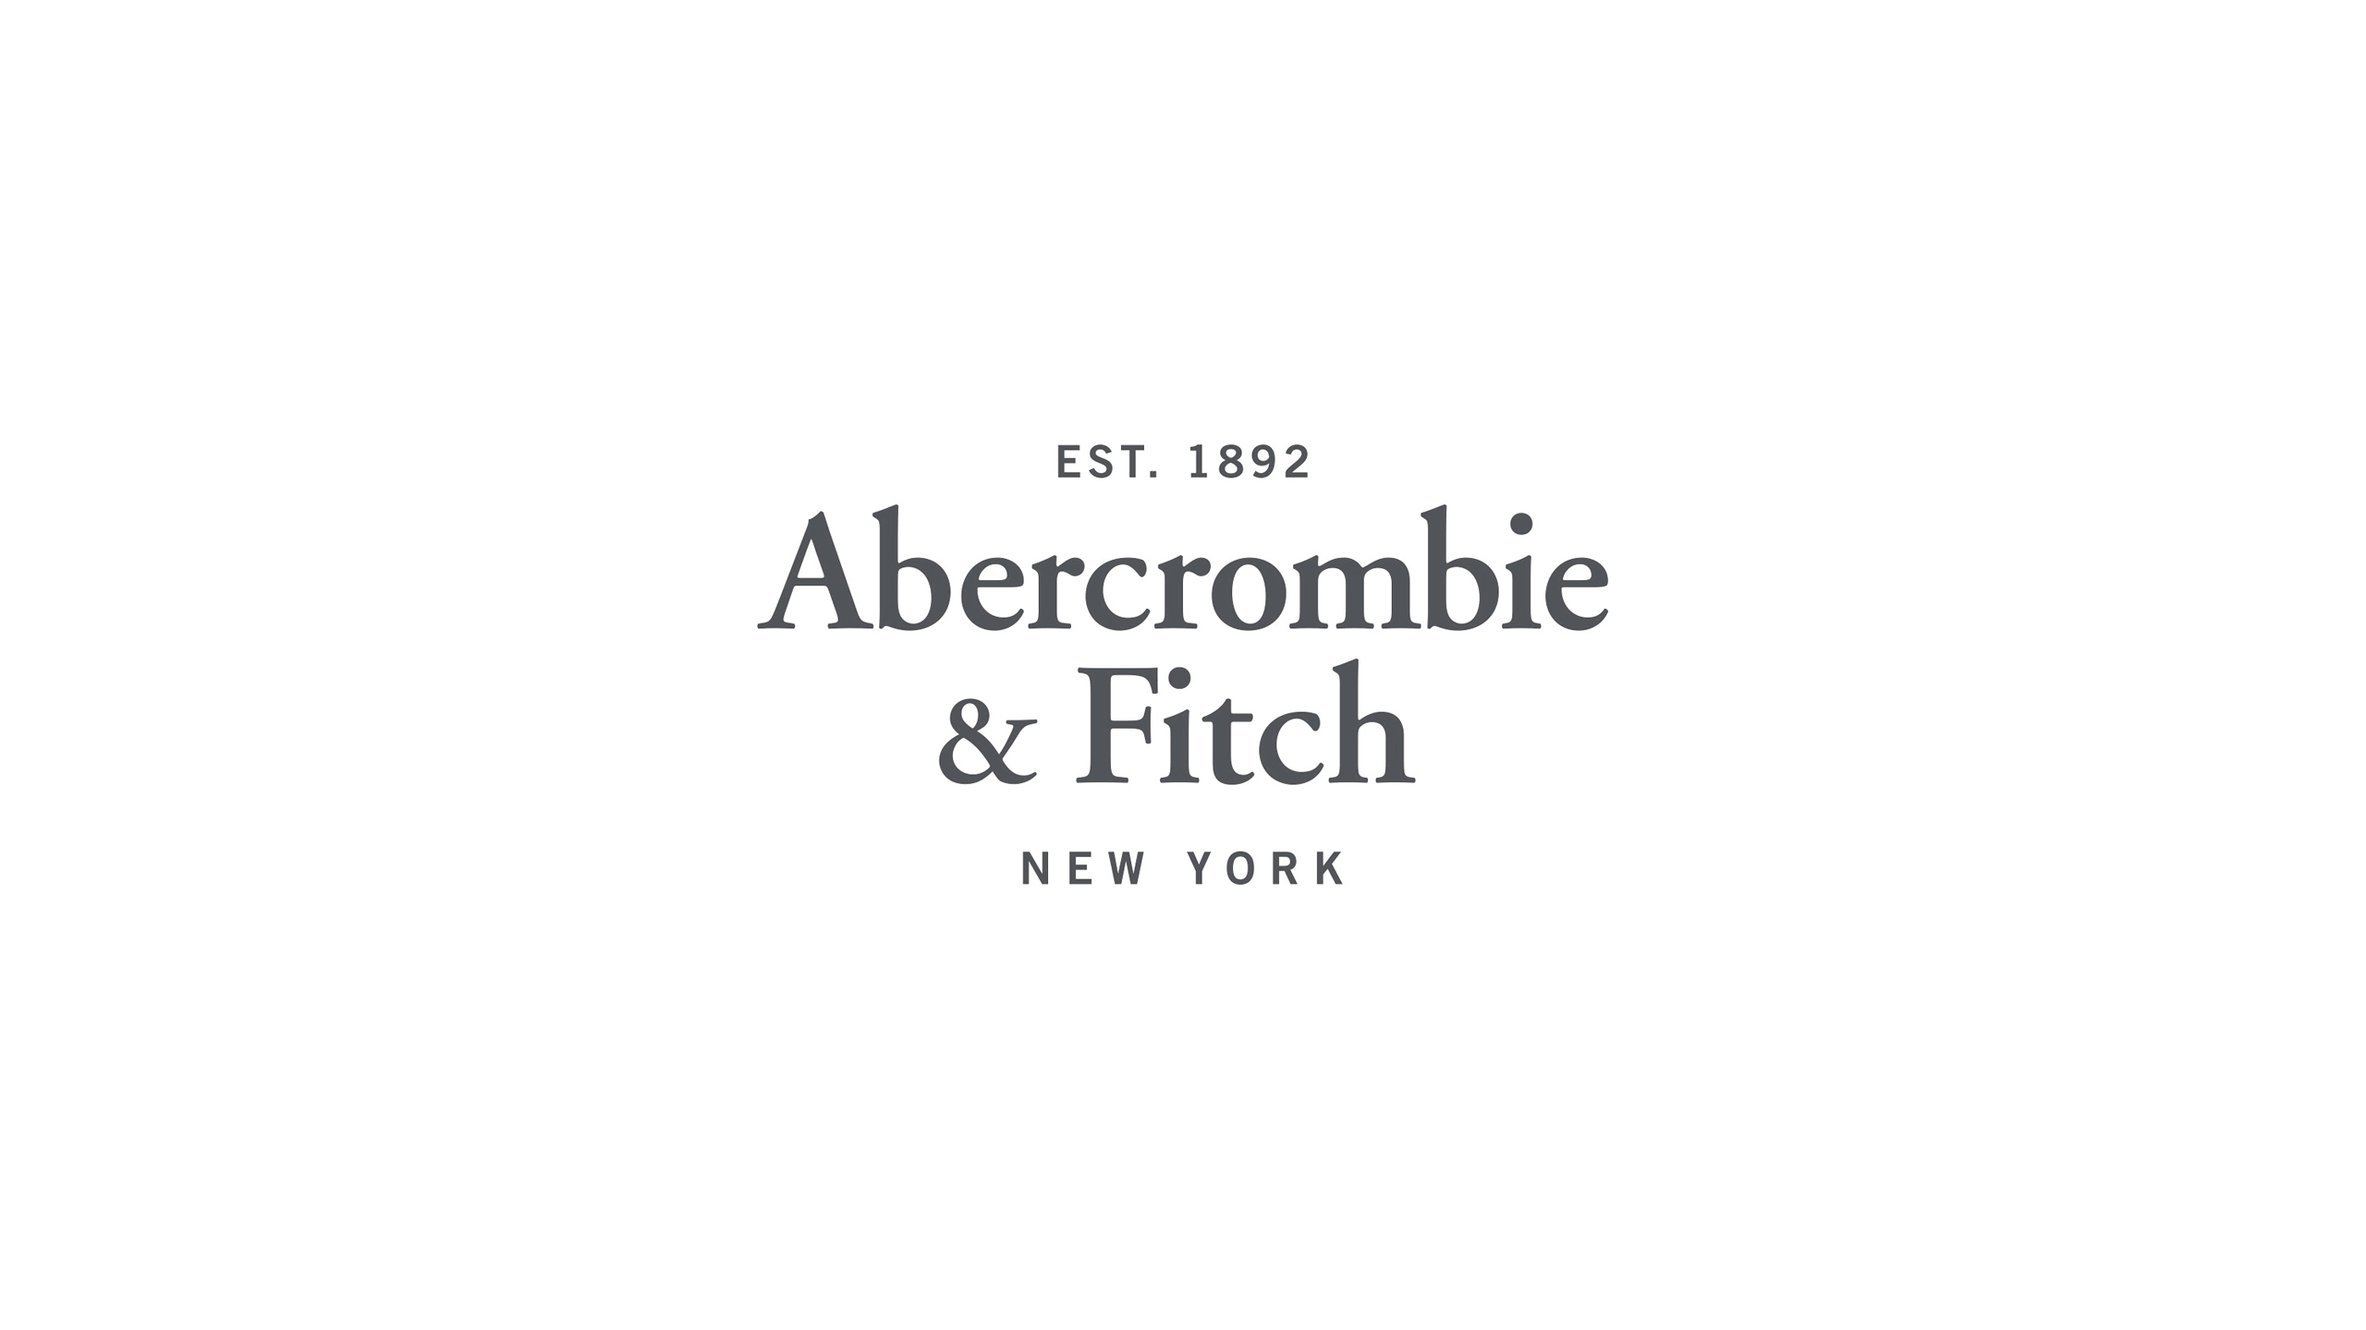 Casting Abercrombie & Fitch commercial!